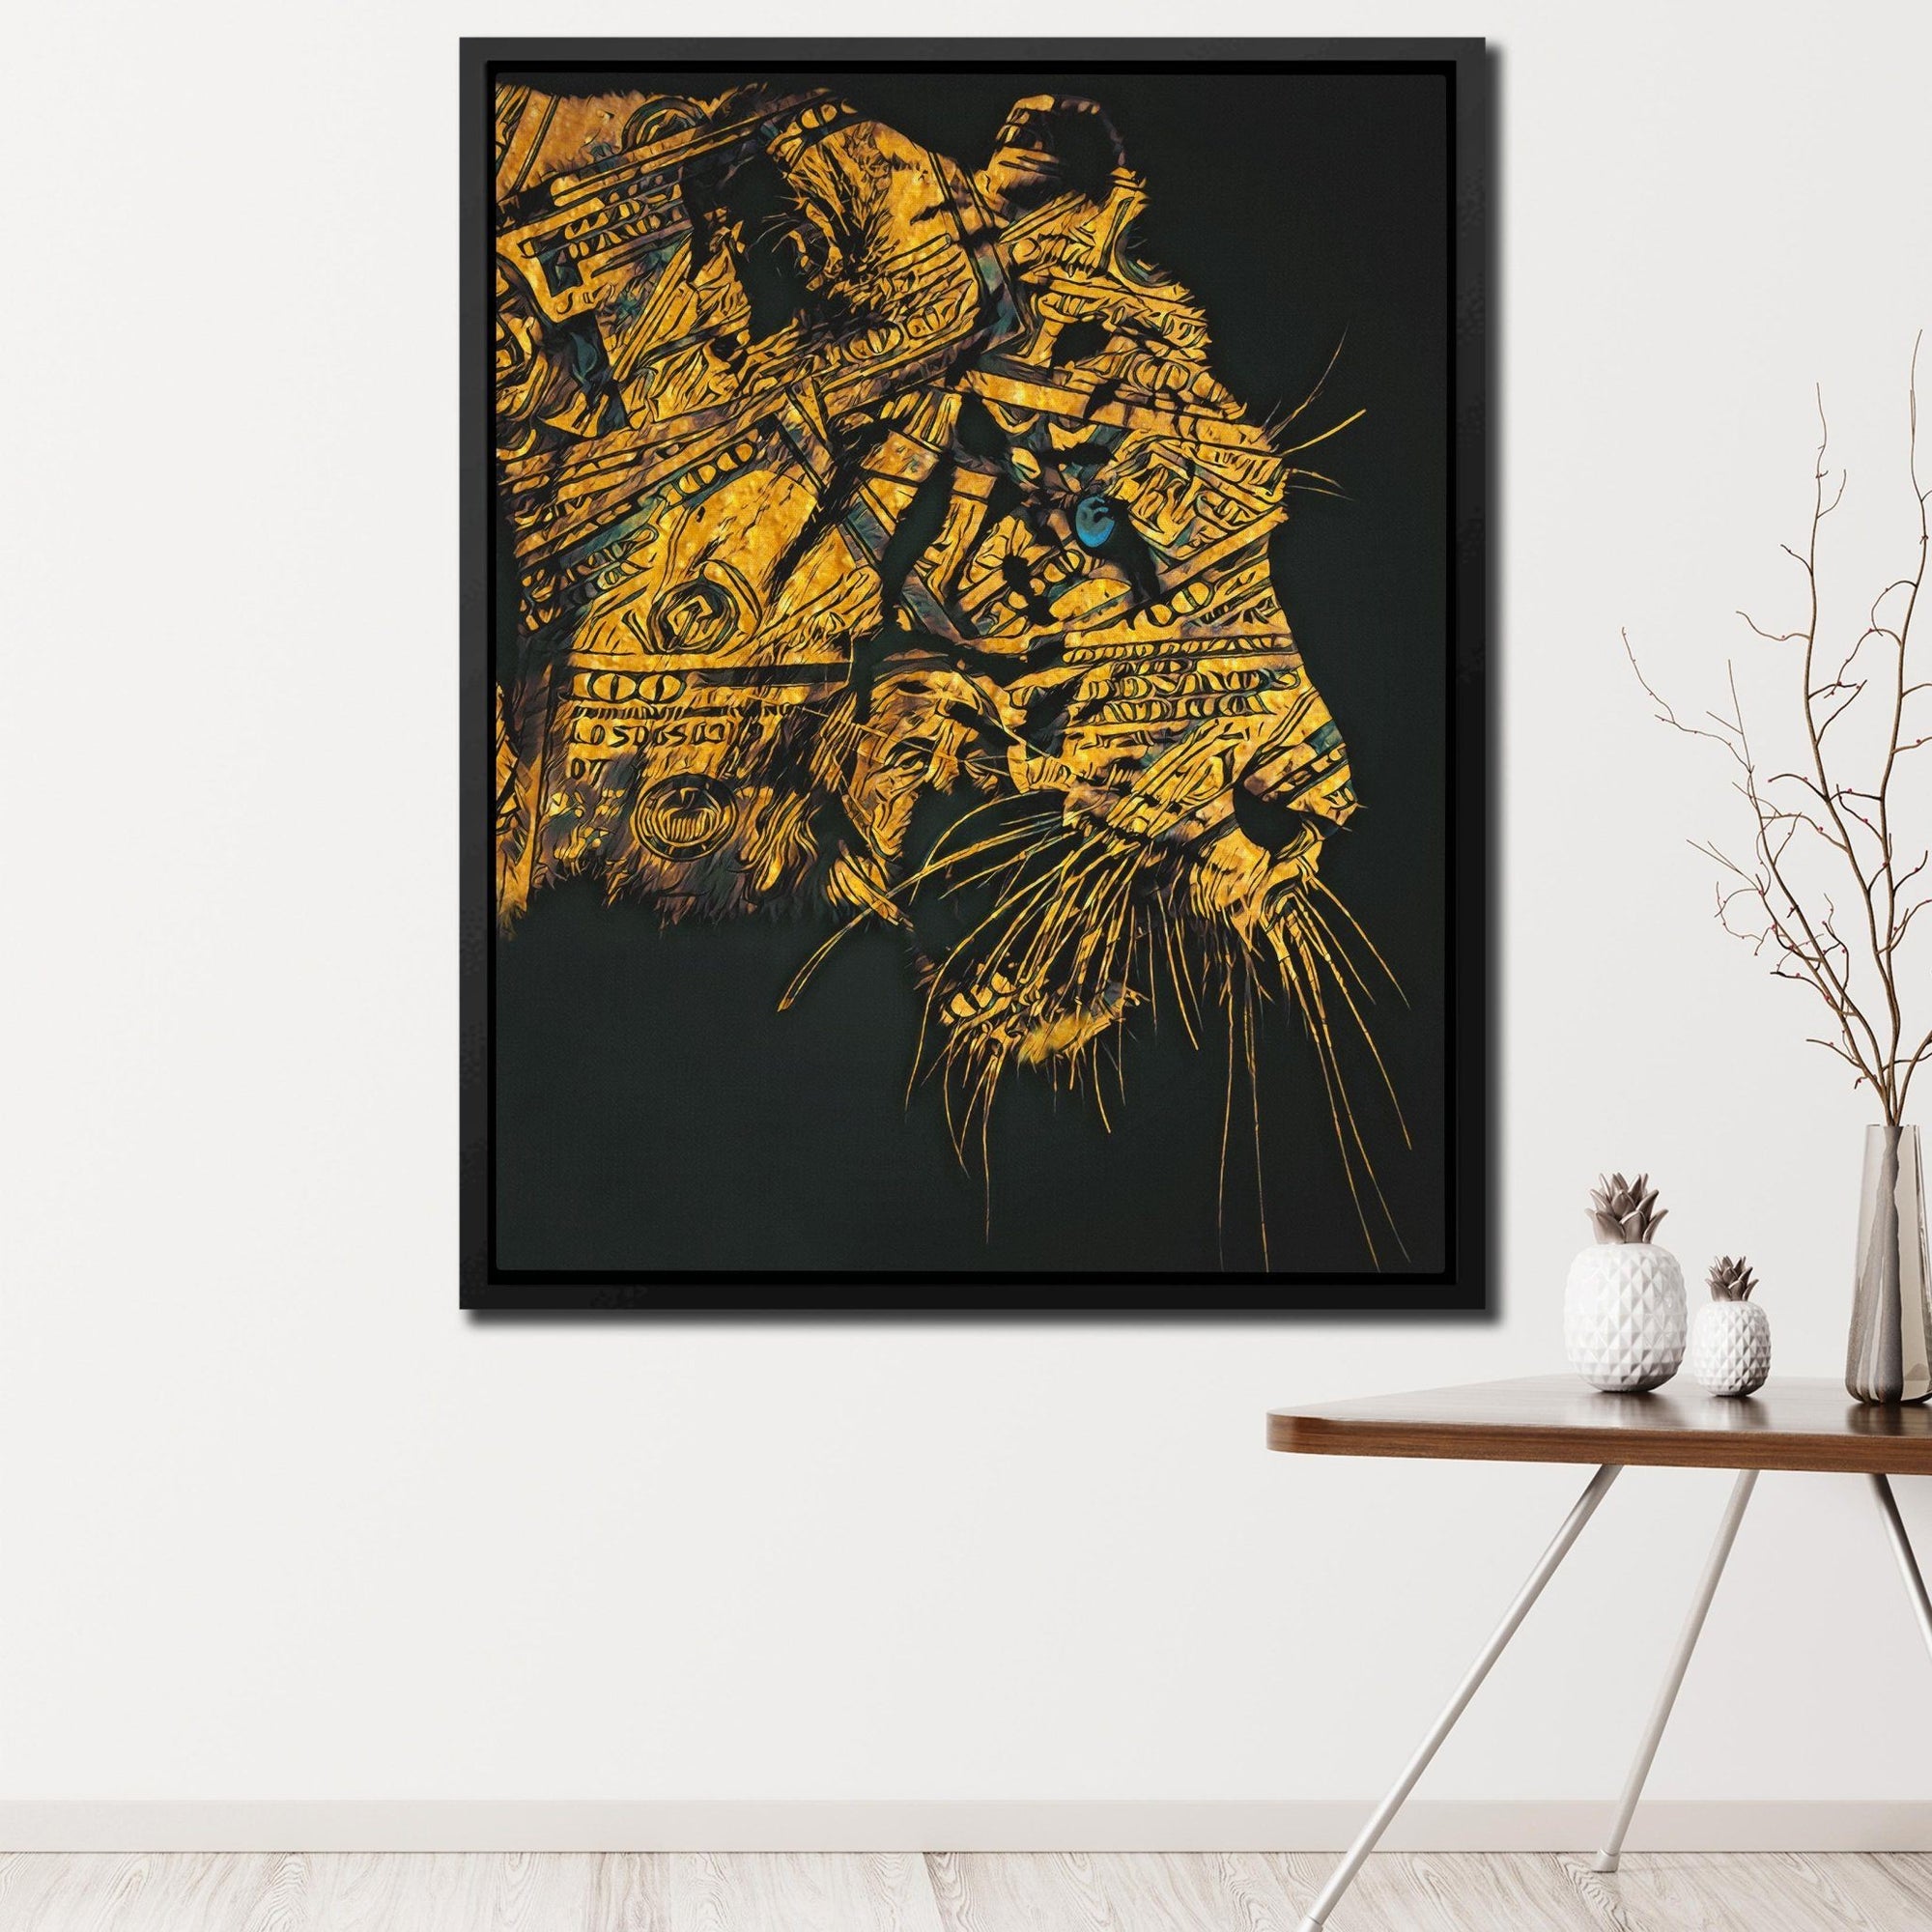 Golden Tiger Hype Beast - Thedopeart Canvas